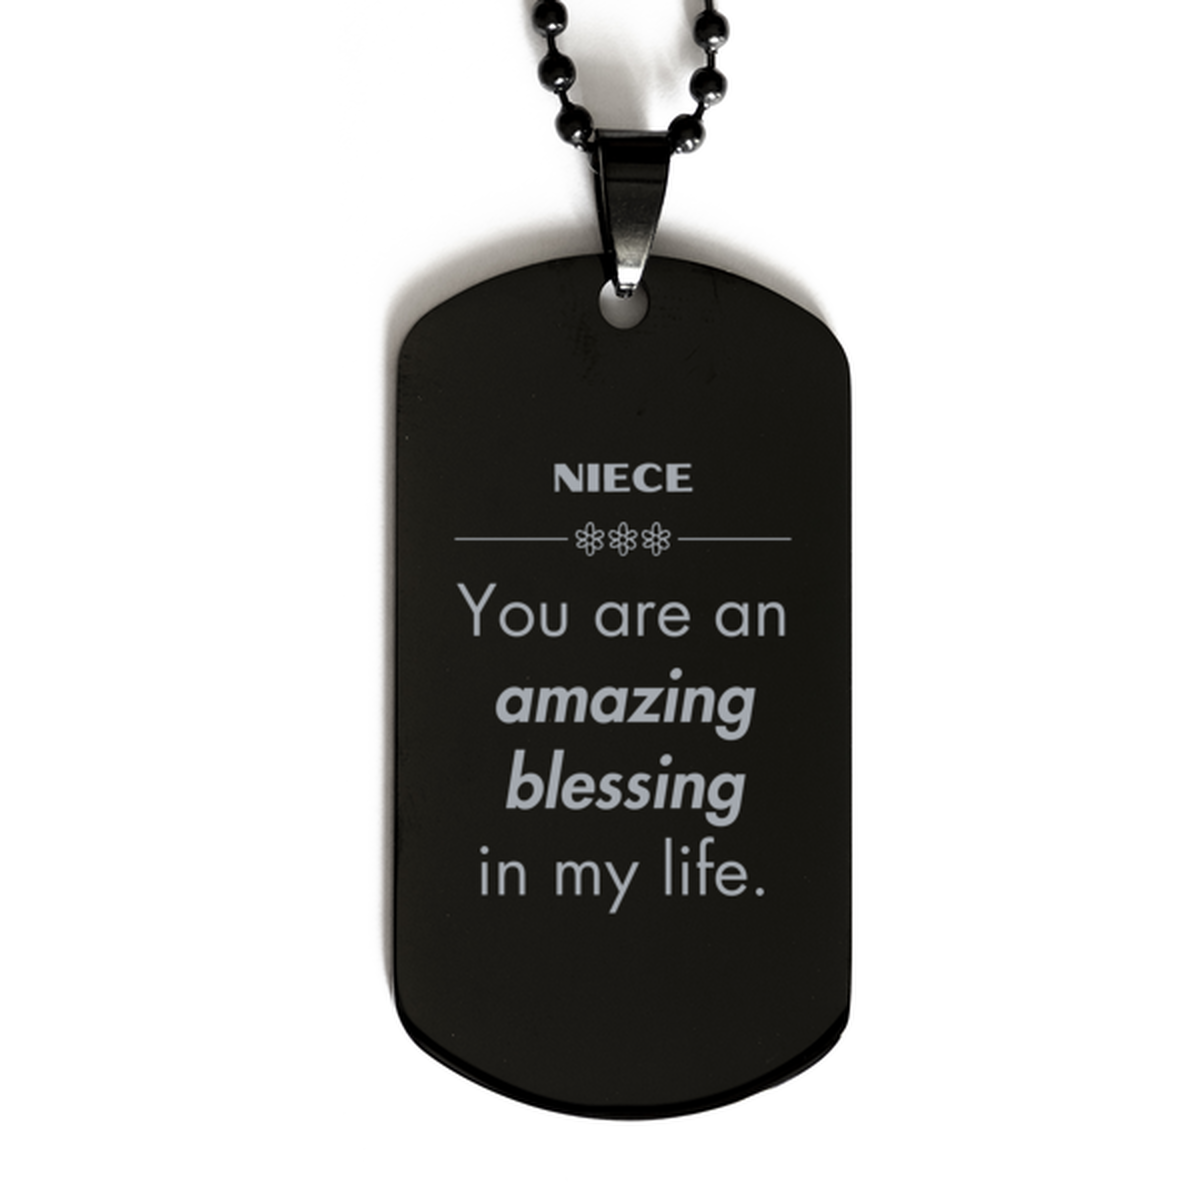 Niece Black Dog Tag, You are an amazing blessing in my life, Thank You Gifts For Niece, Inspirational Birthday Christmas Unique Gifts For Niece